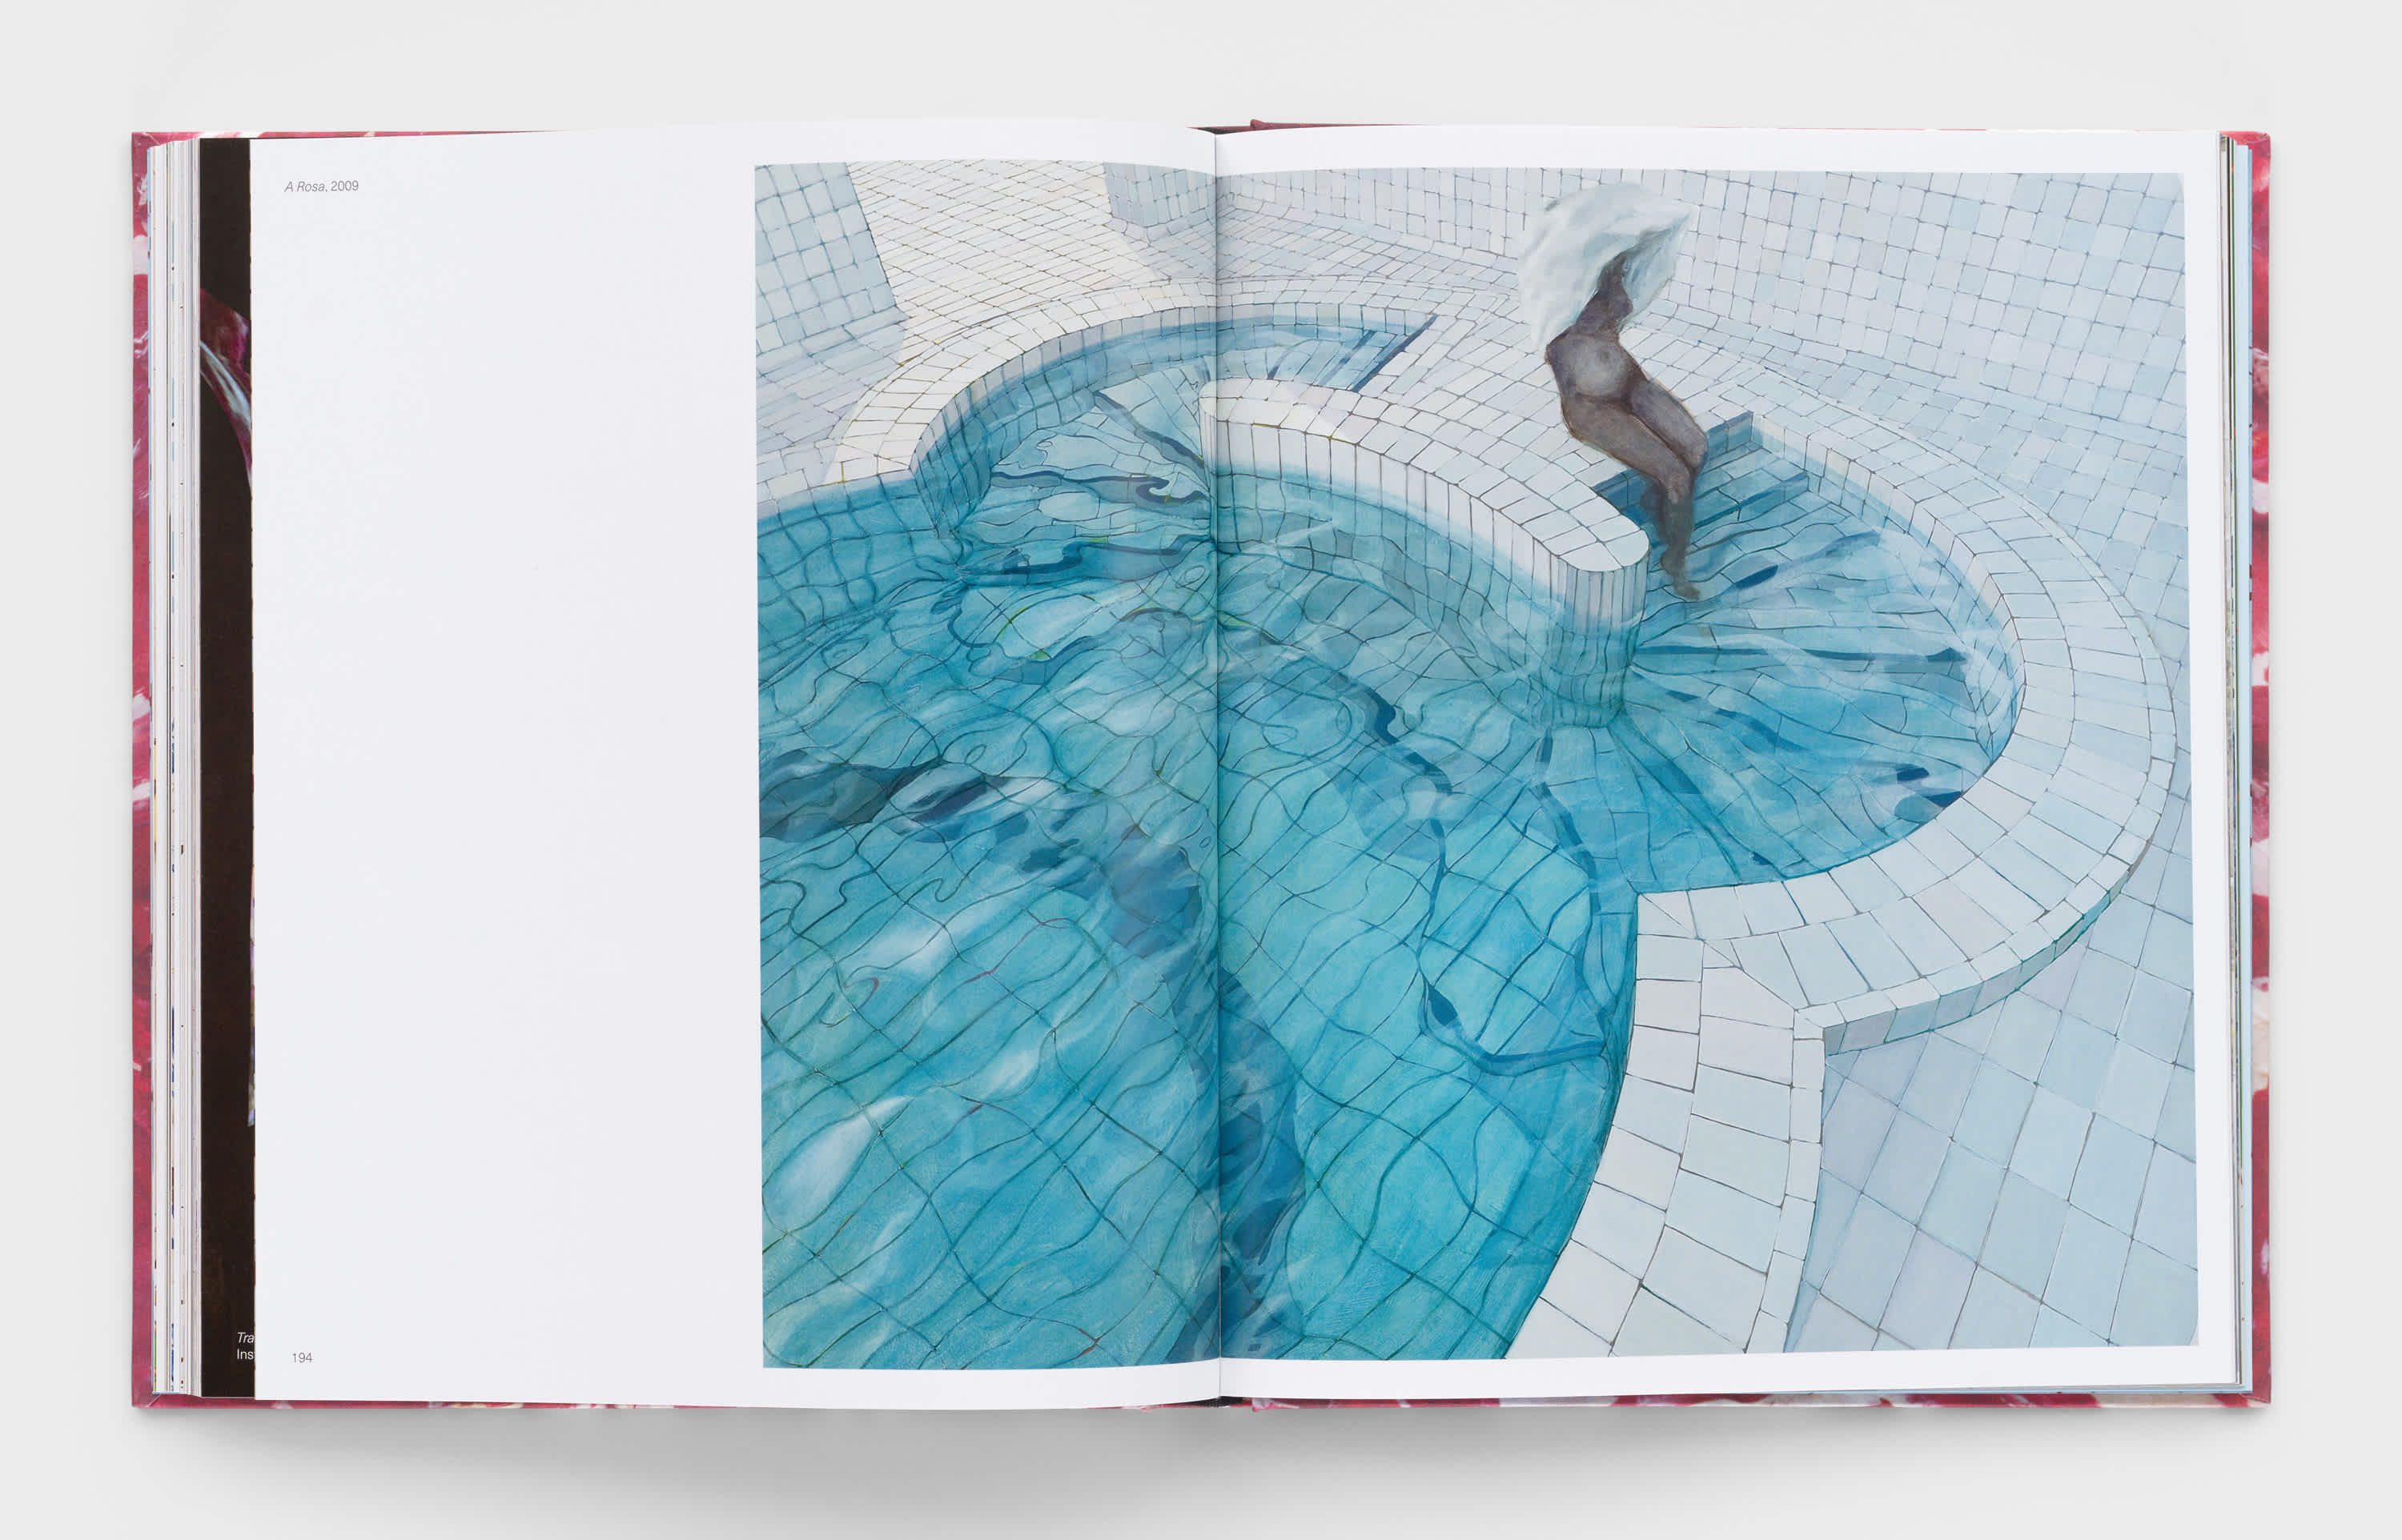 Open book showing an artwork depicting a person dipping their feet into a blue tile pool.